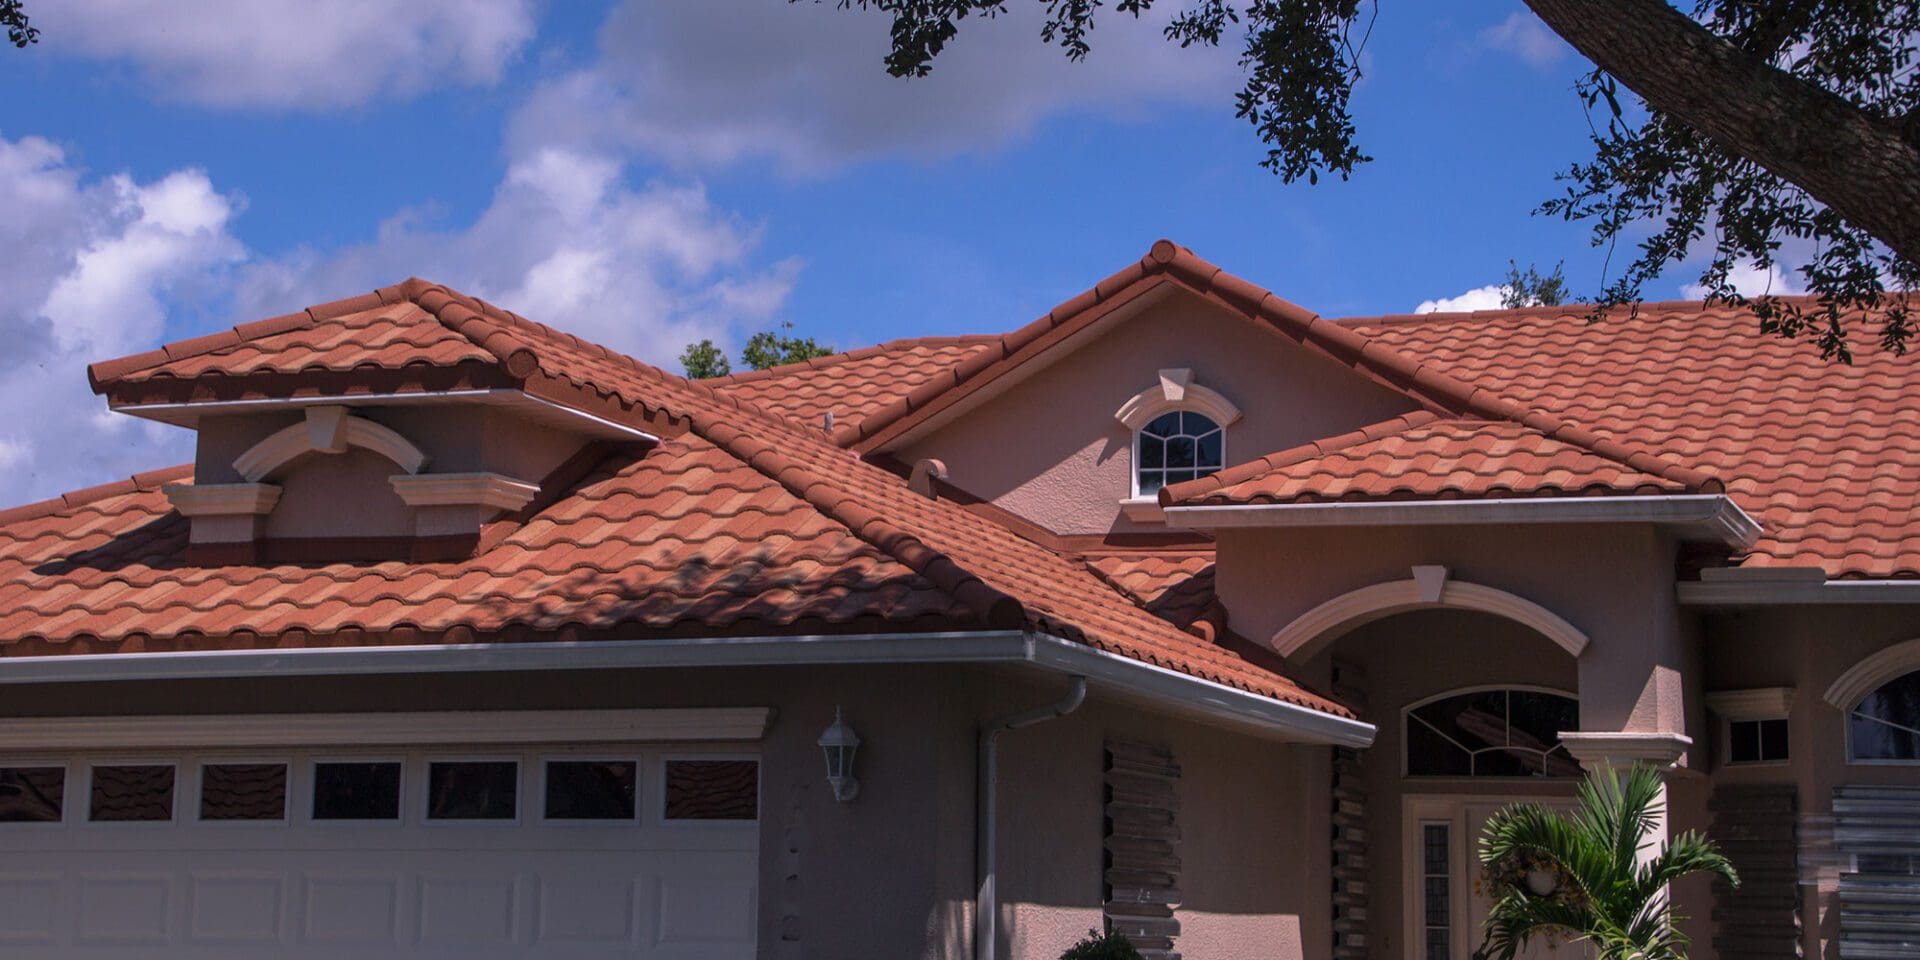 Tile Roof Replacement Florida